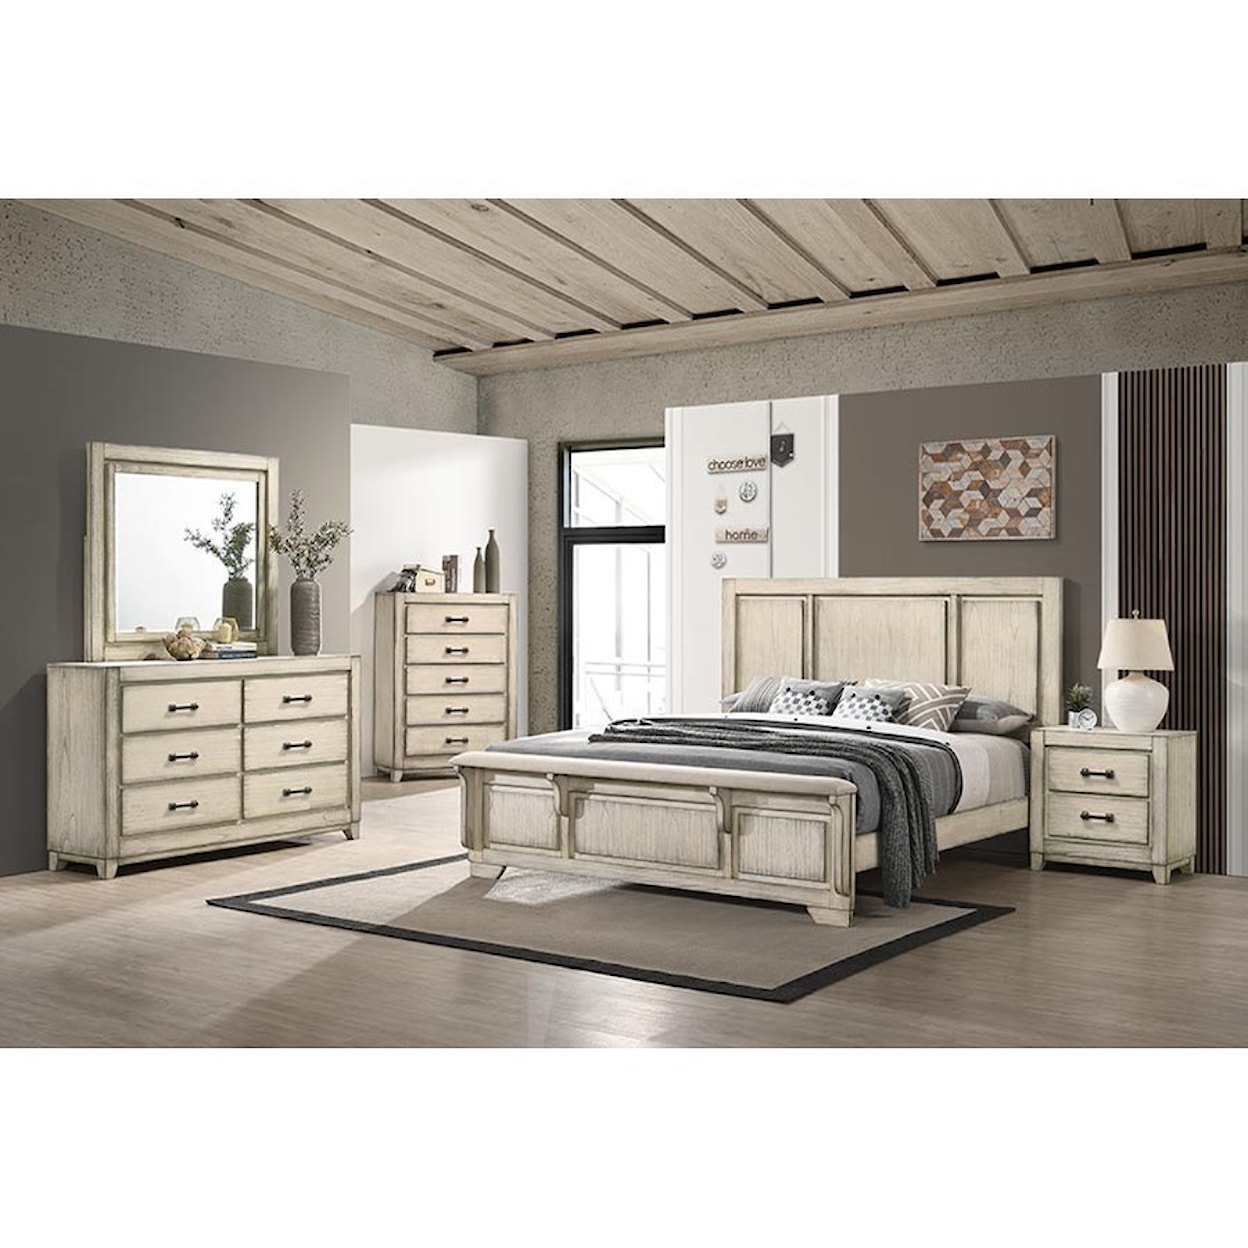 New Classic Furniture Ashland King Bedroom Group